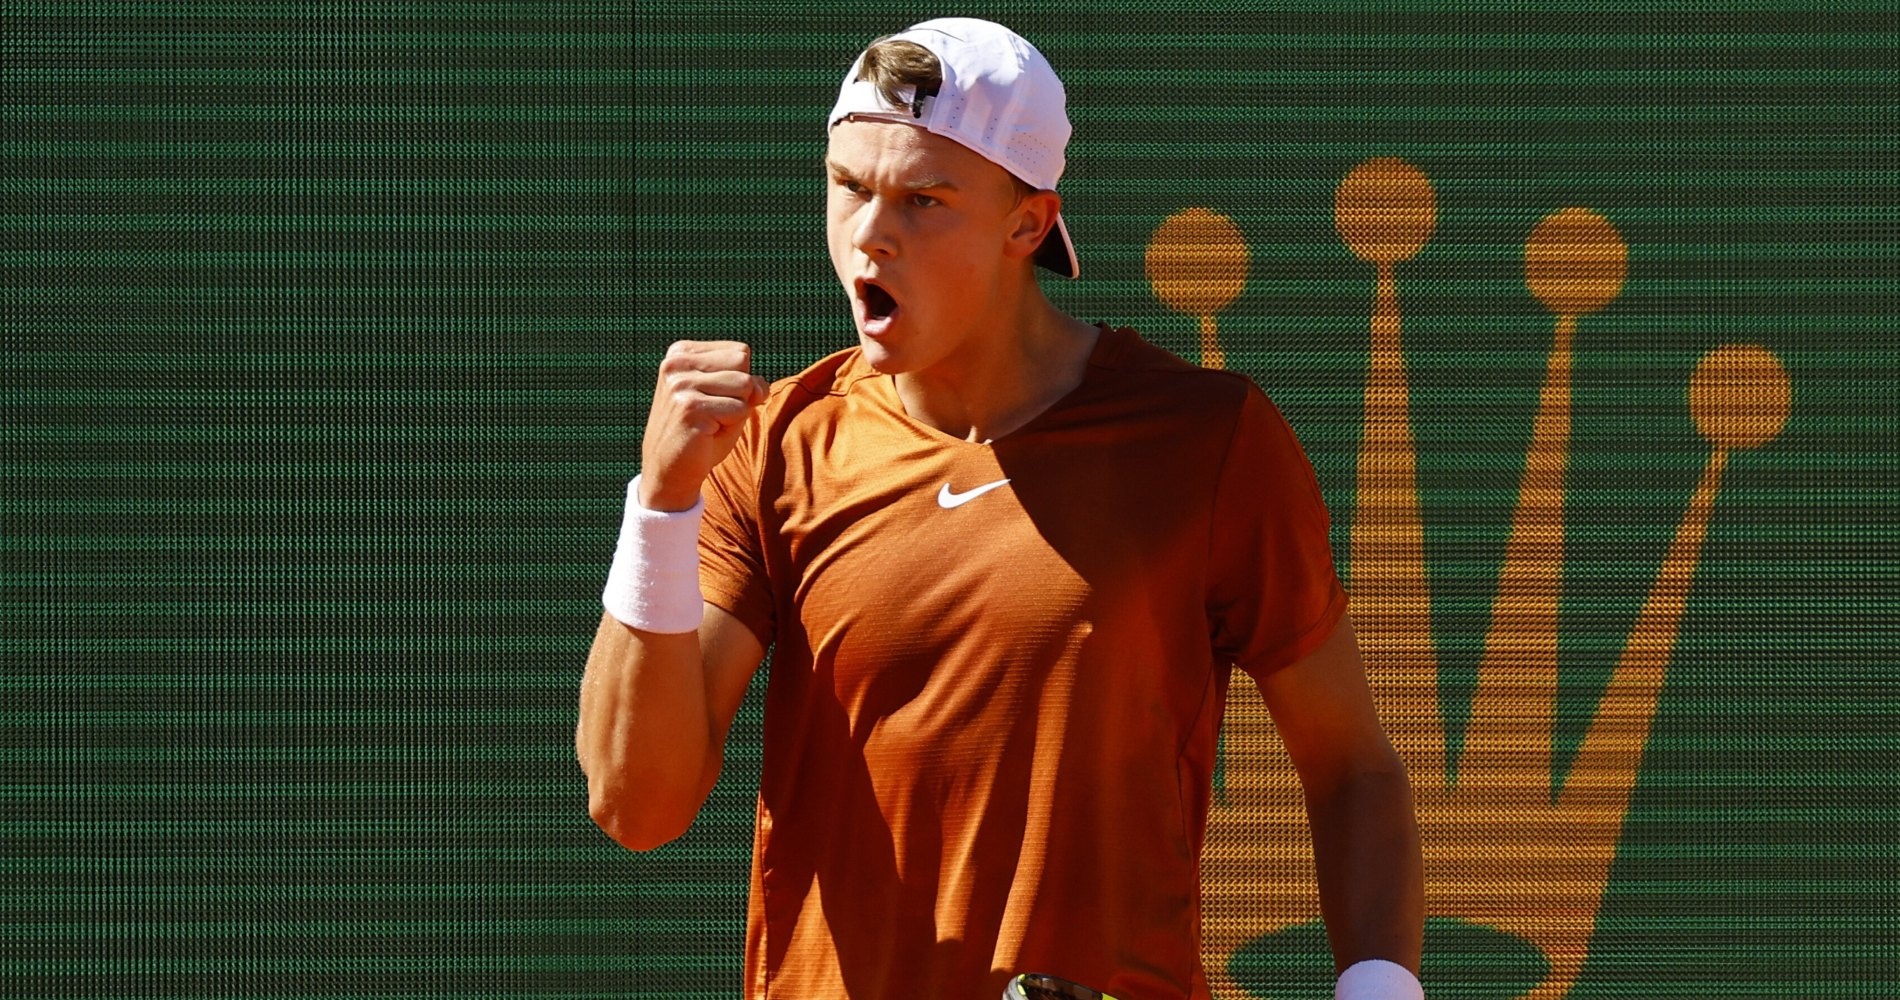 Rune too good for Medvedev in Monte-Carlo